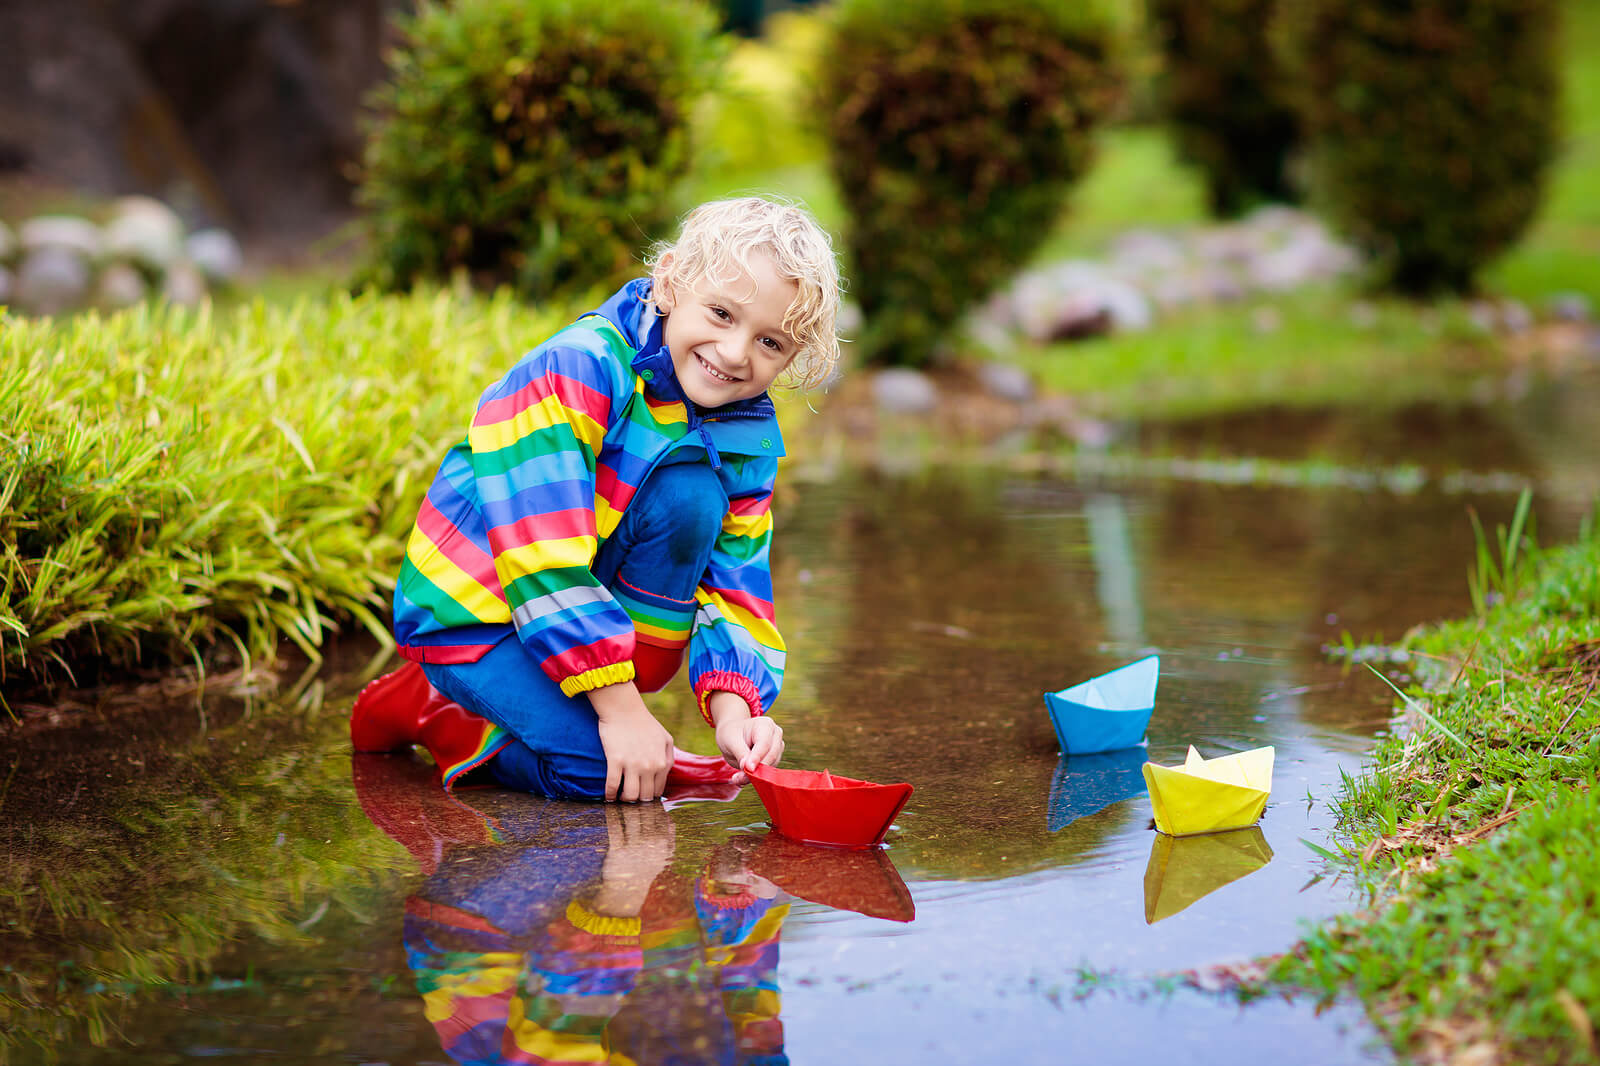 A child wearing a rain jacket while playing with paper boats in a stream.